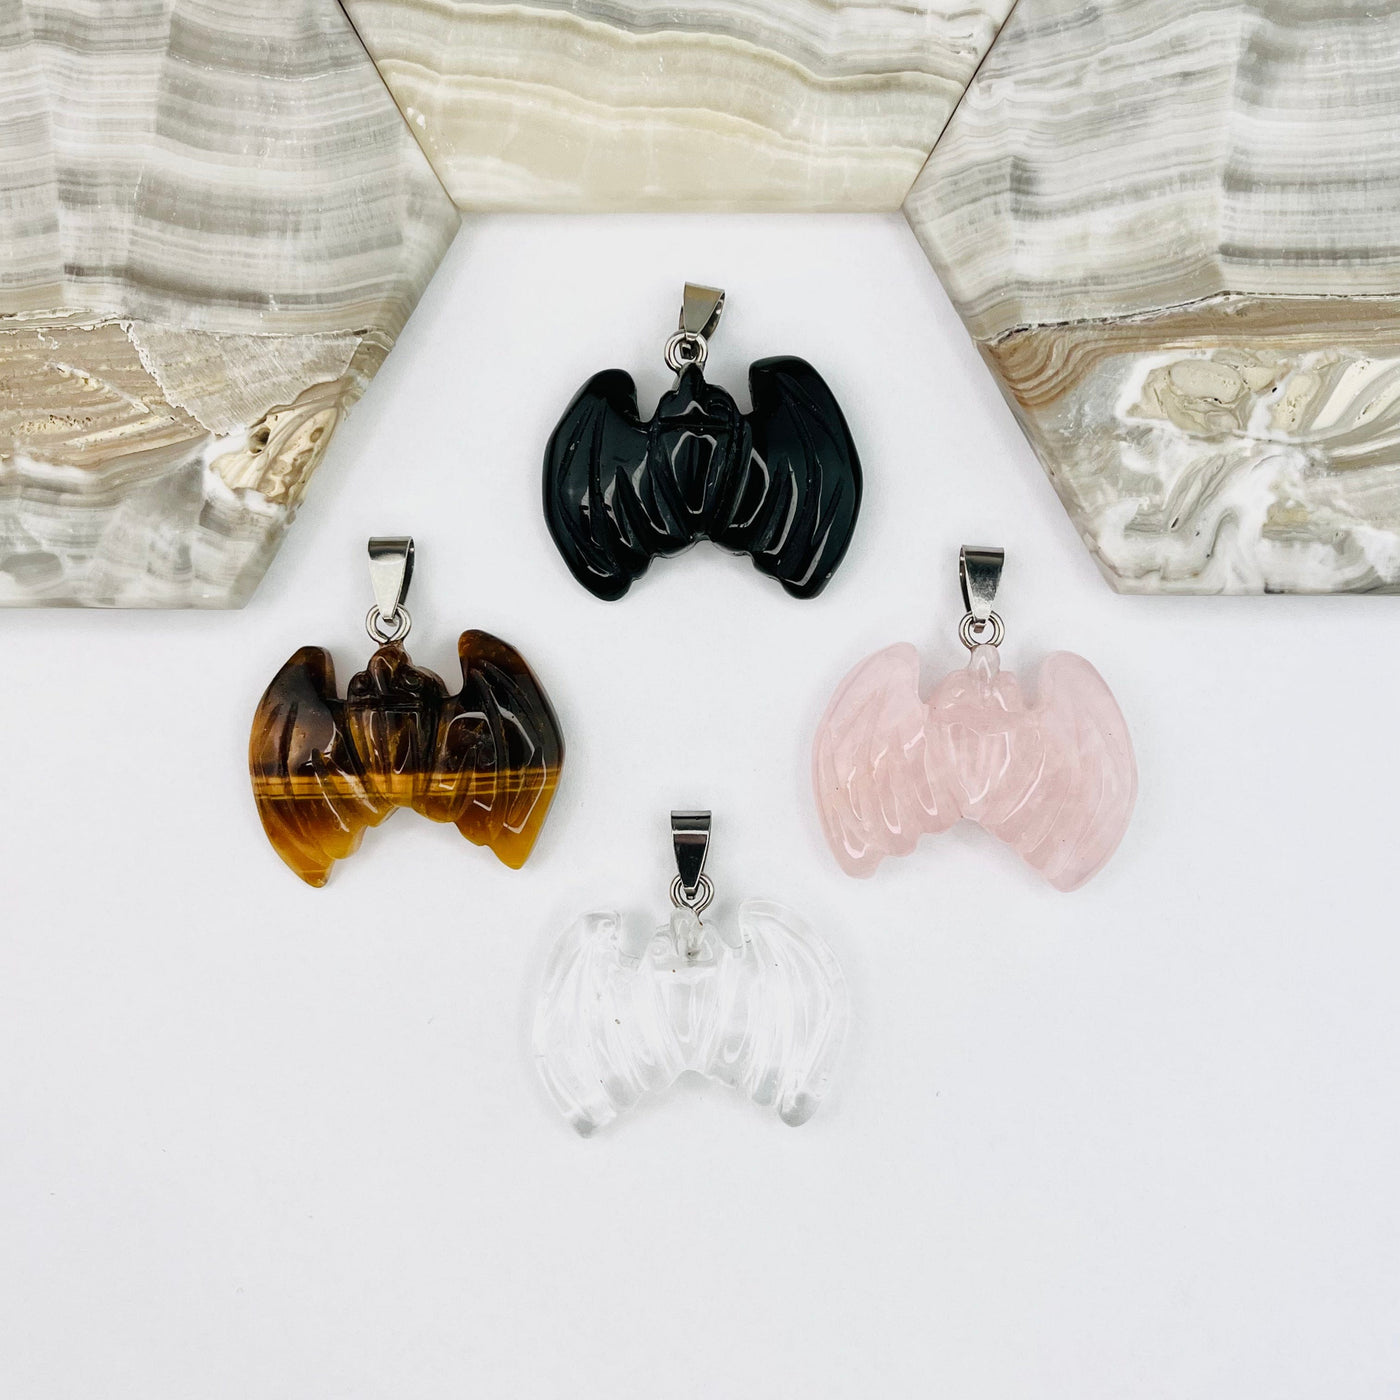 One of each of the Four types of Bat Gemstone Pendants  on a white surface.